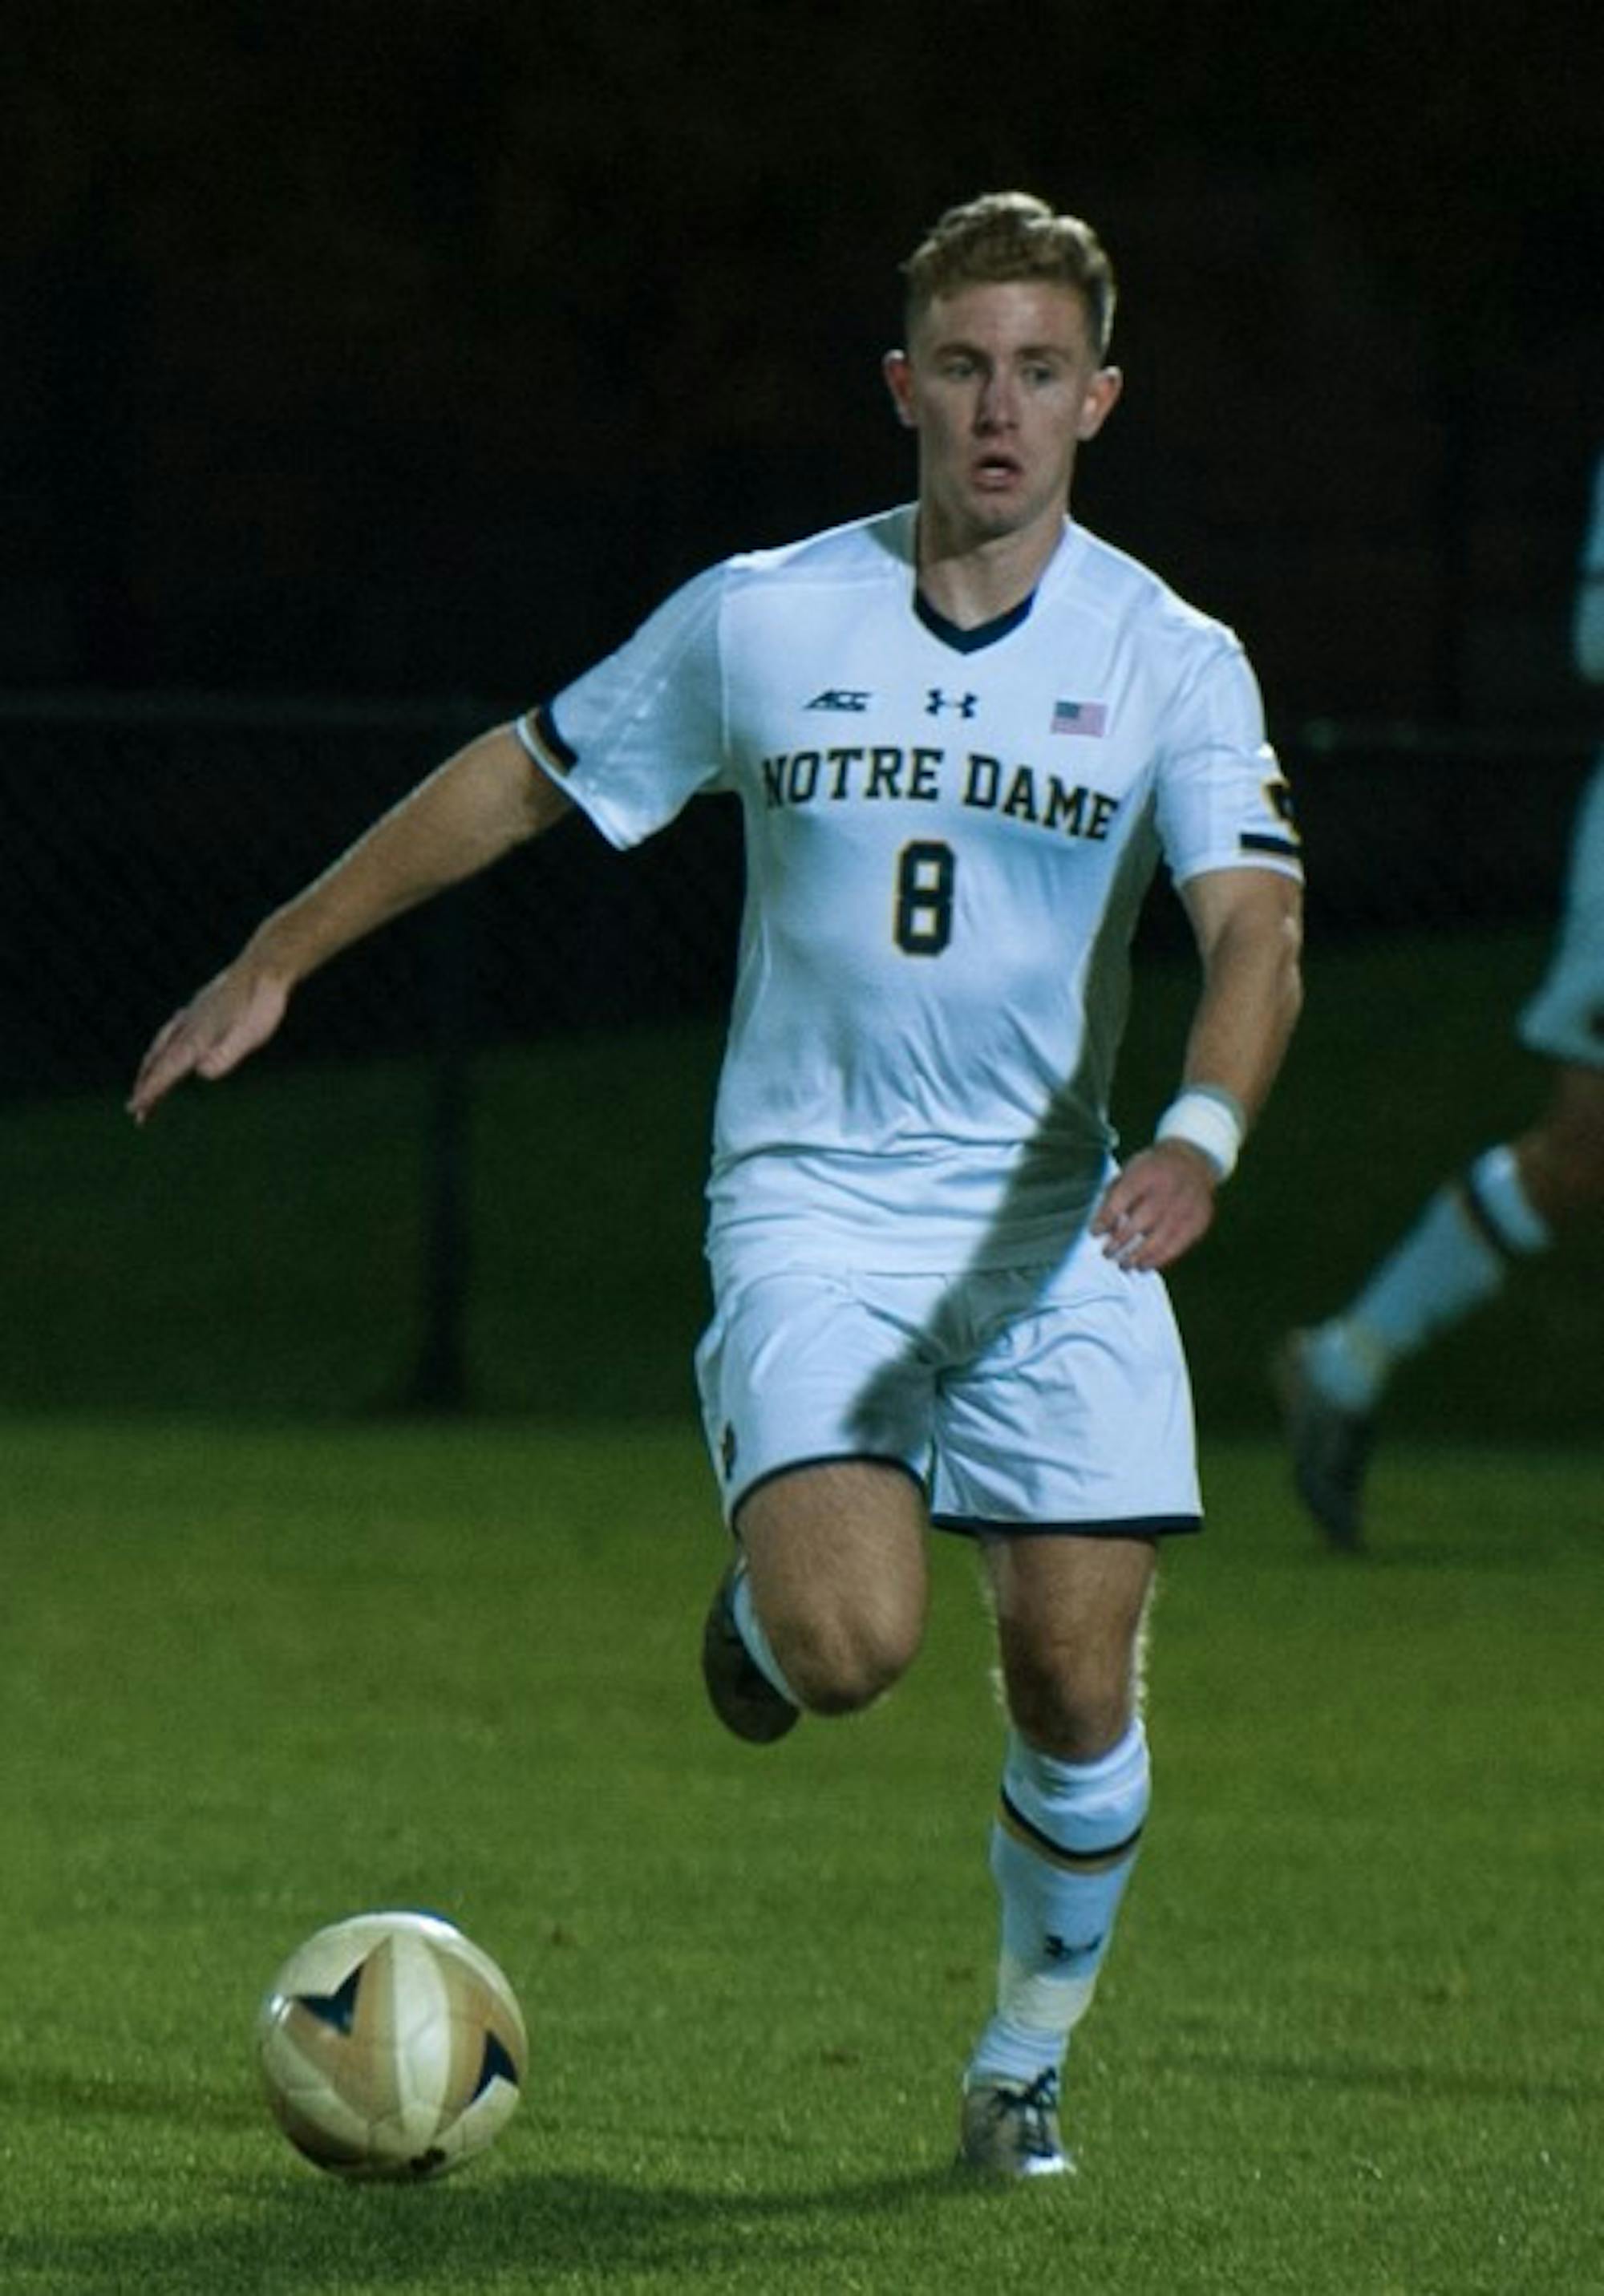 Irish senior forward dribbles across the field during Notre Dame's 1-0 loss to Michigan State on Oct. 25 at Alumni Stadium.